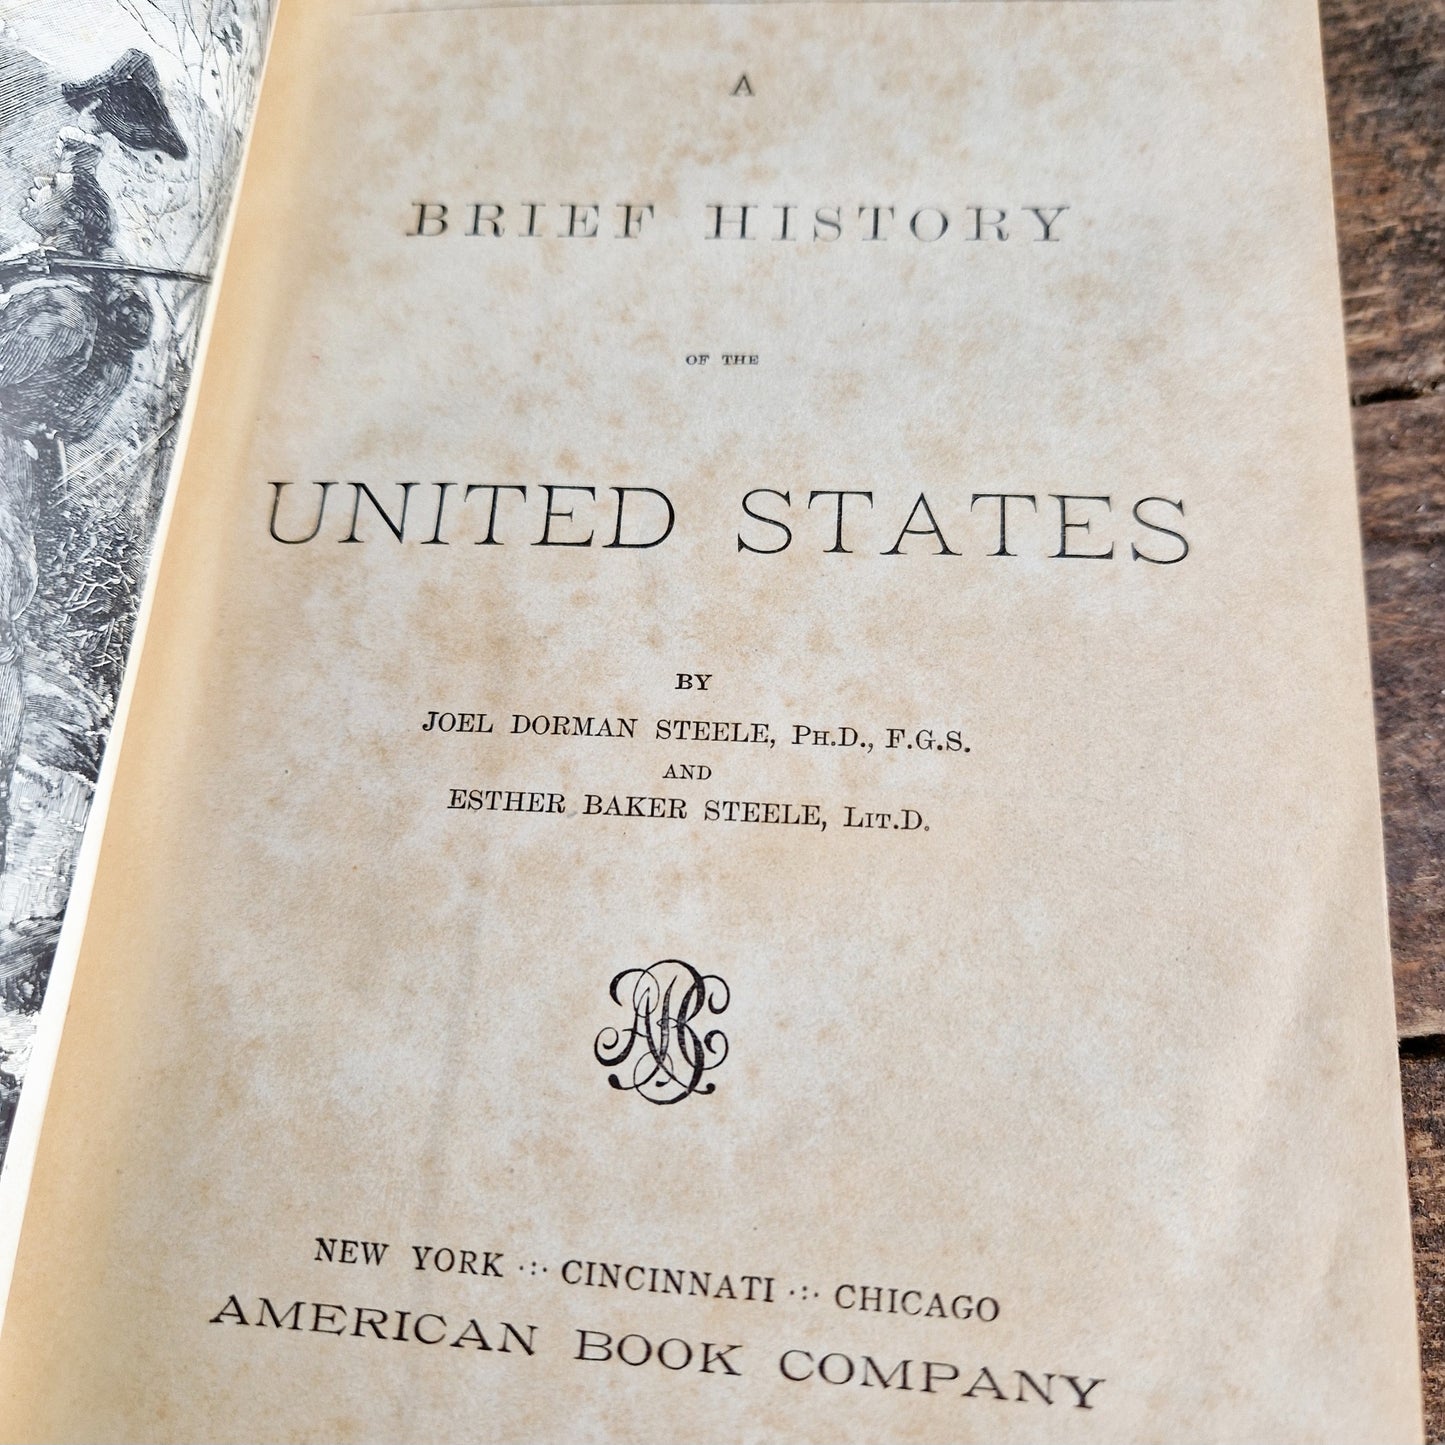 Antique American book. A brief history of the United States.